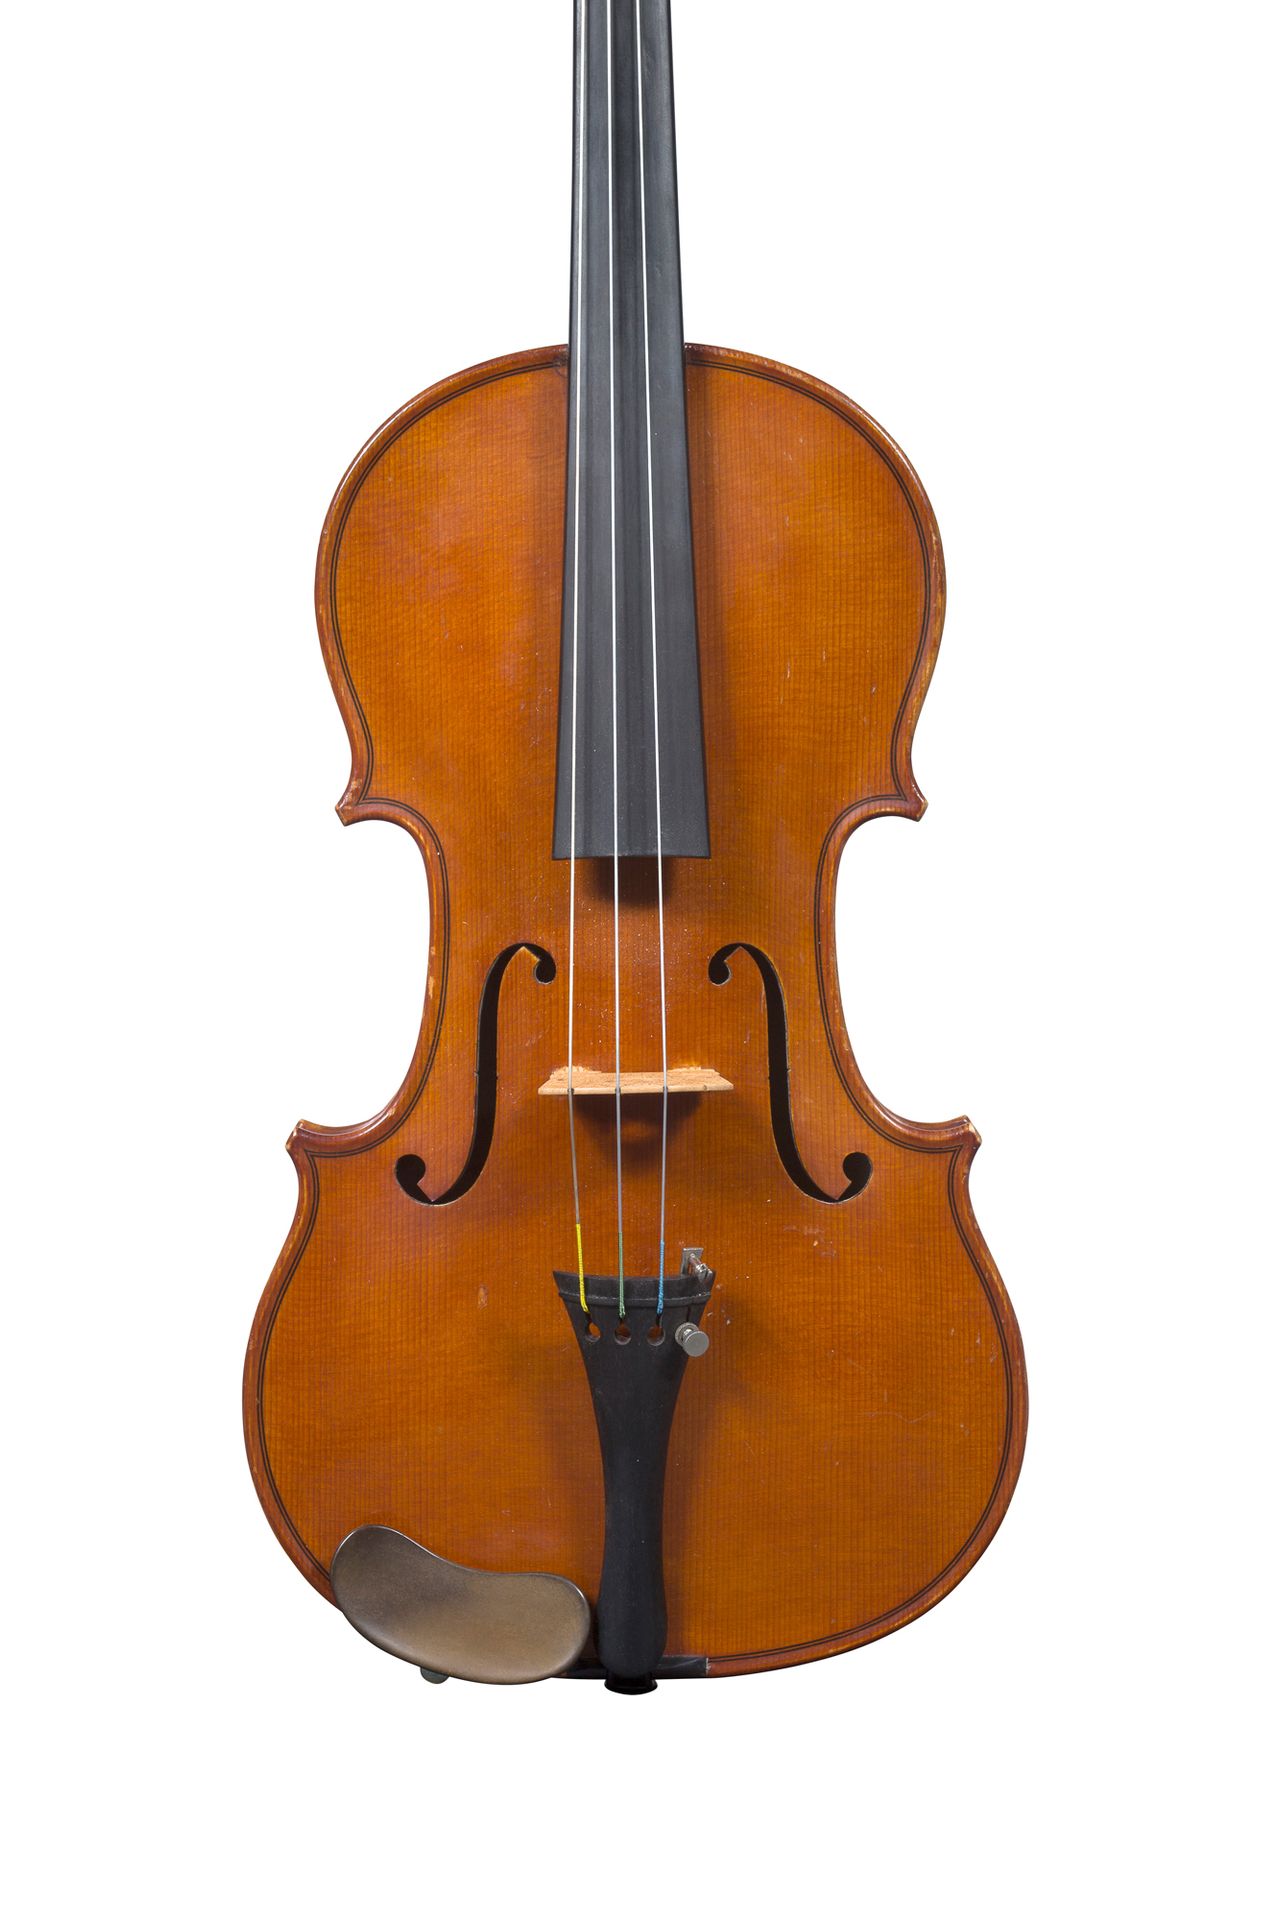 Null A French Violin, Mirecourt 1930-40